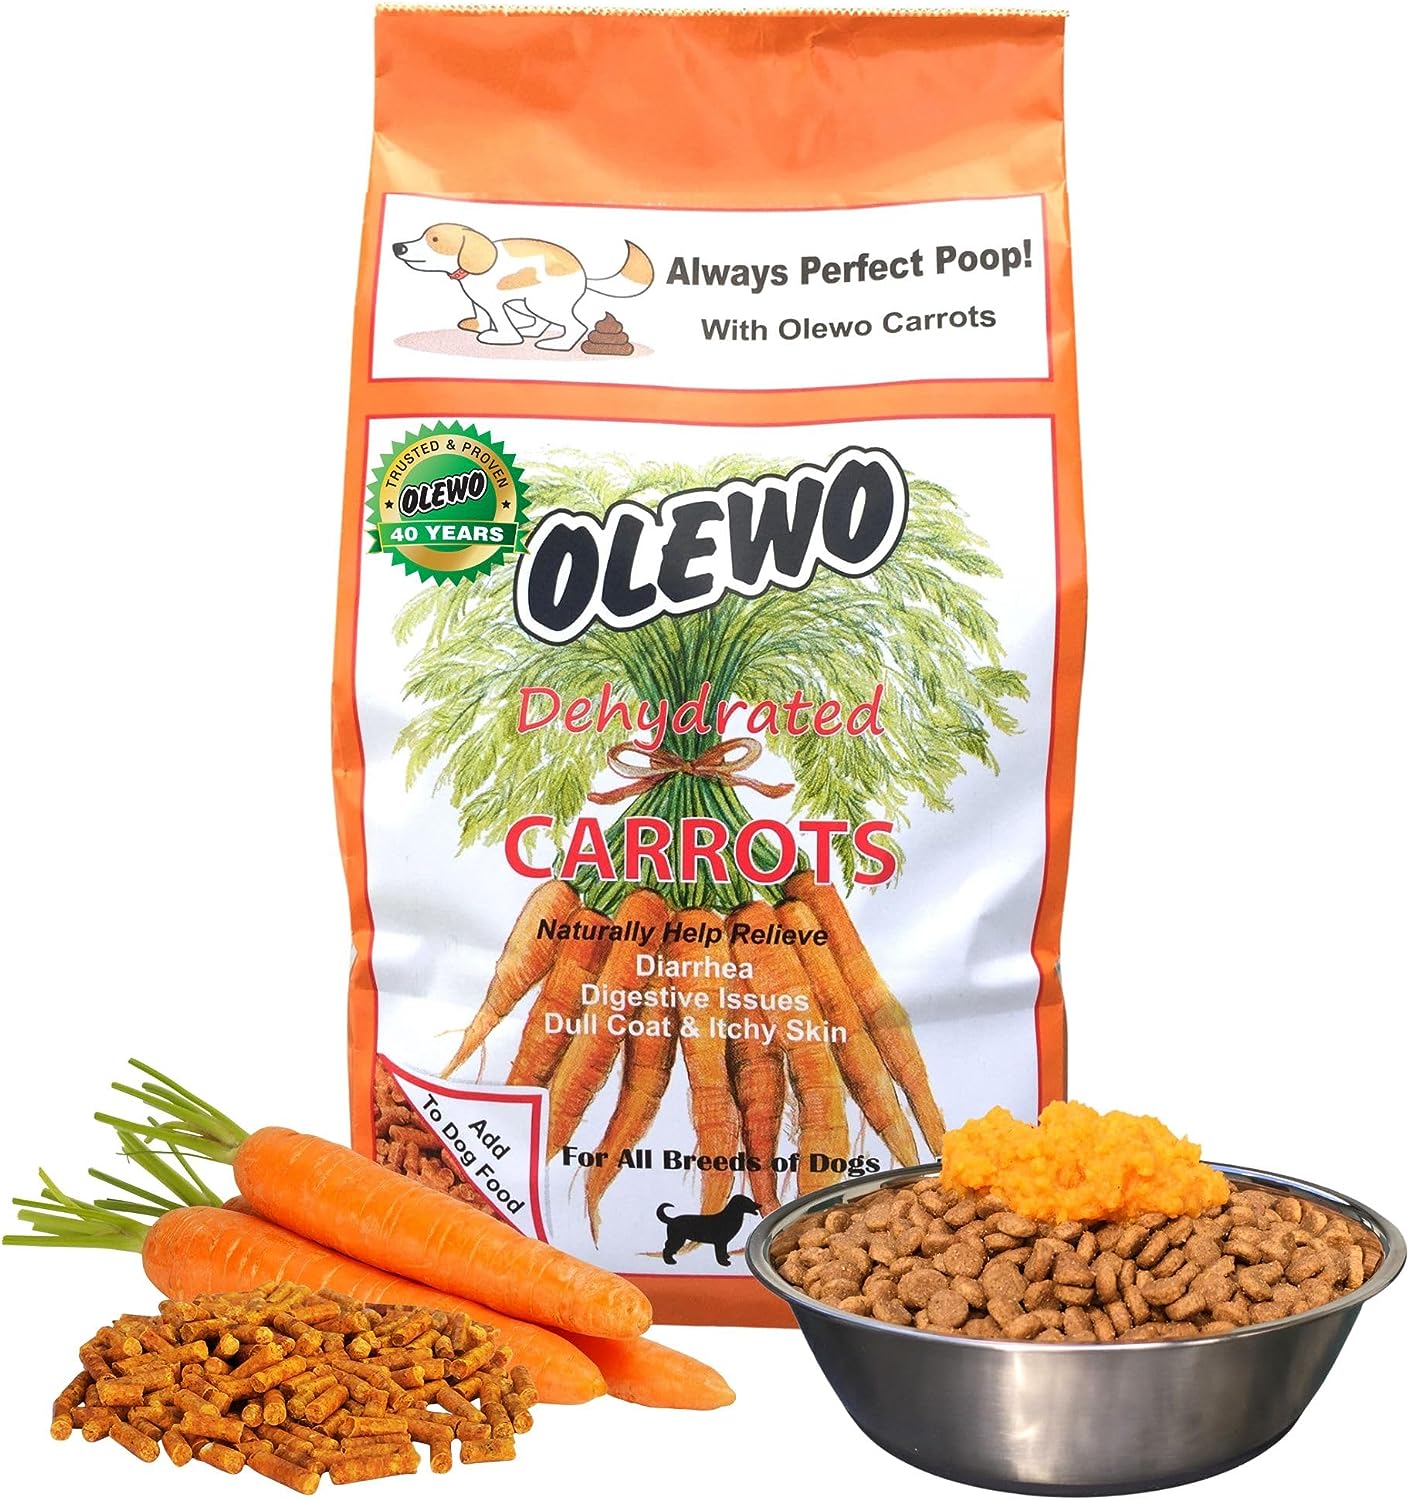 Olewo Original Carrots for Dogs – Fiber for Dogs Keep Poop Firm, Digestive Dog Food Topper, Skin & Coat Support, Dehydrated Whole Food Dog Multivitamin, Gut Health for Dogs, 1 lb